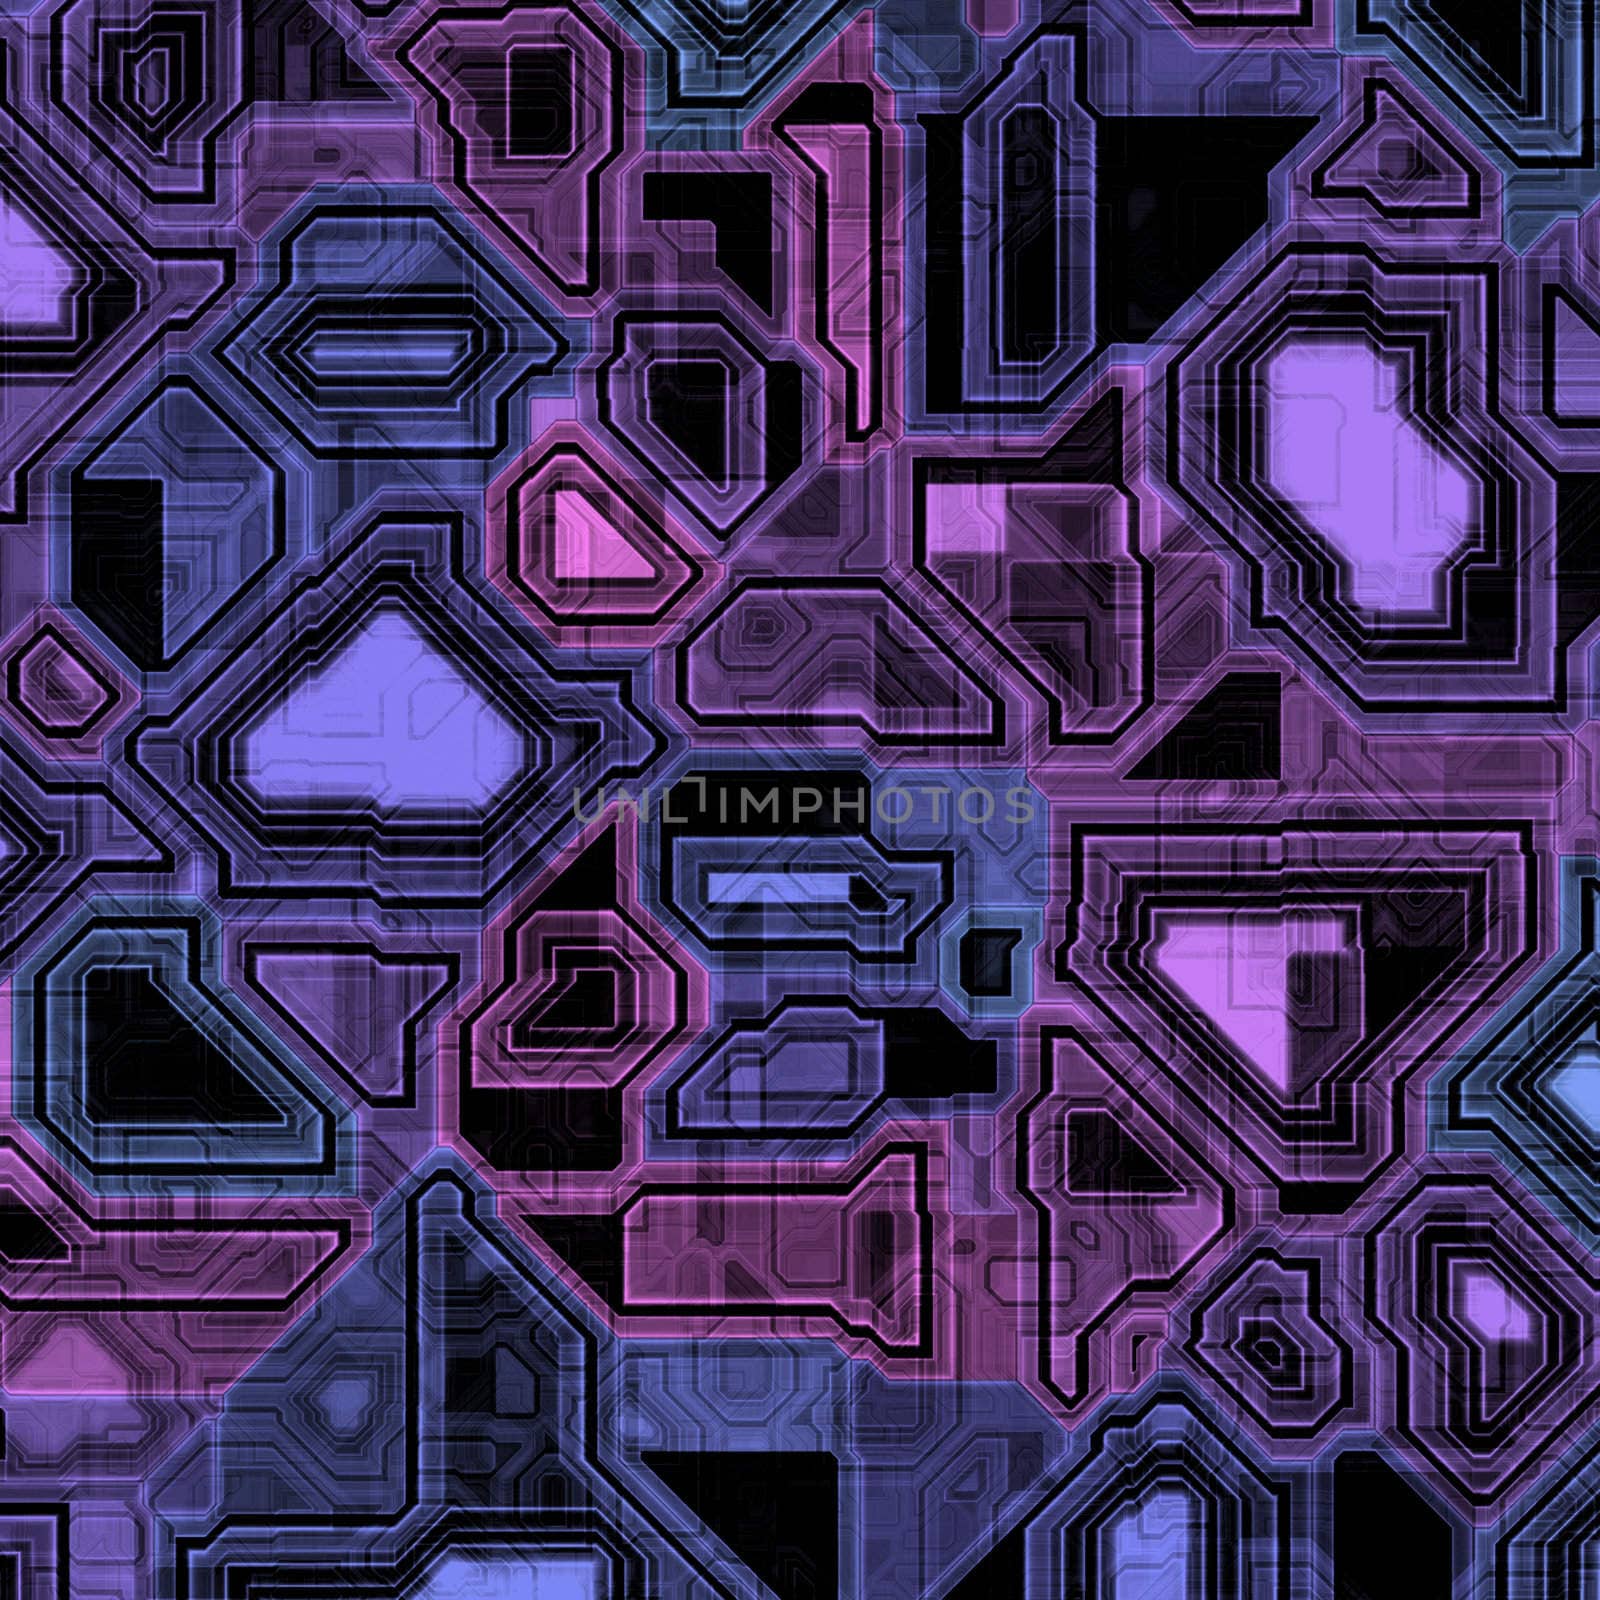 Illustration of some high-tech computer circuitry.